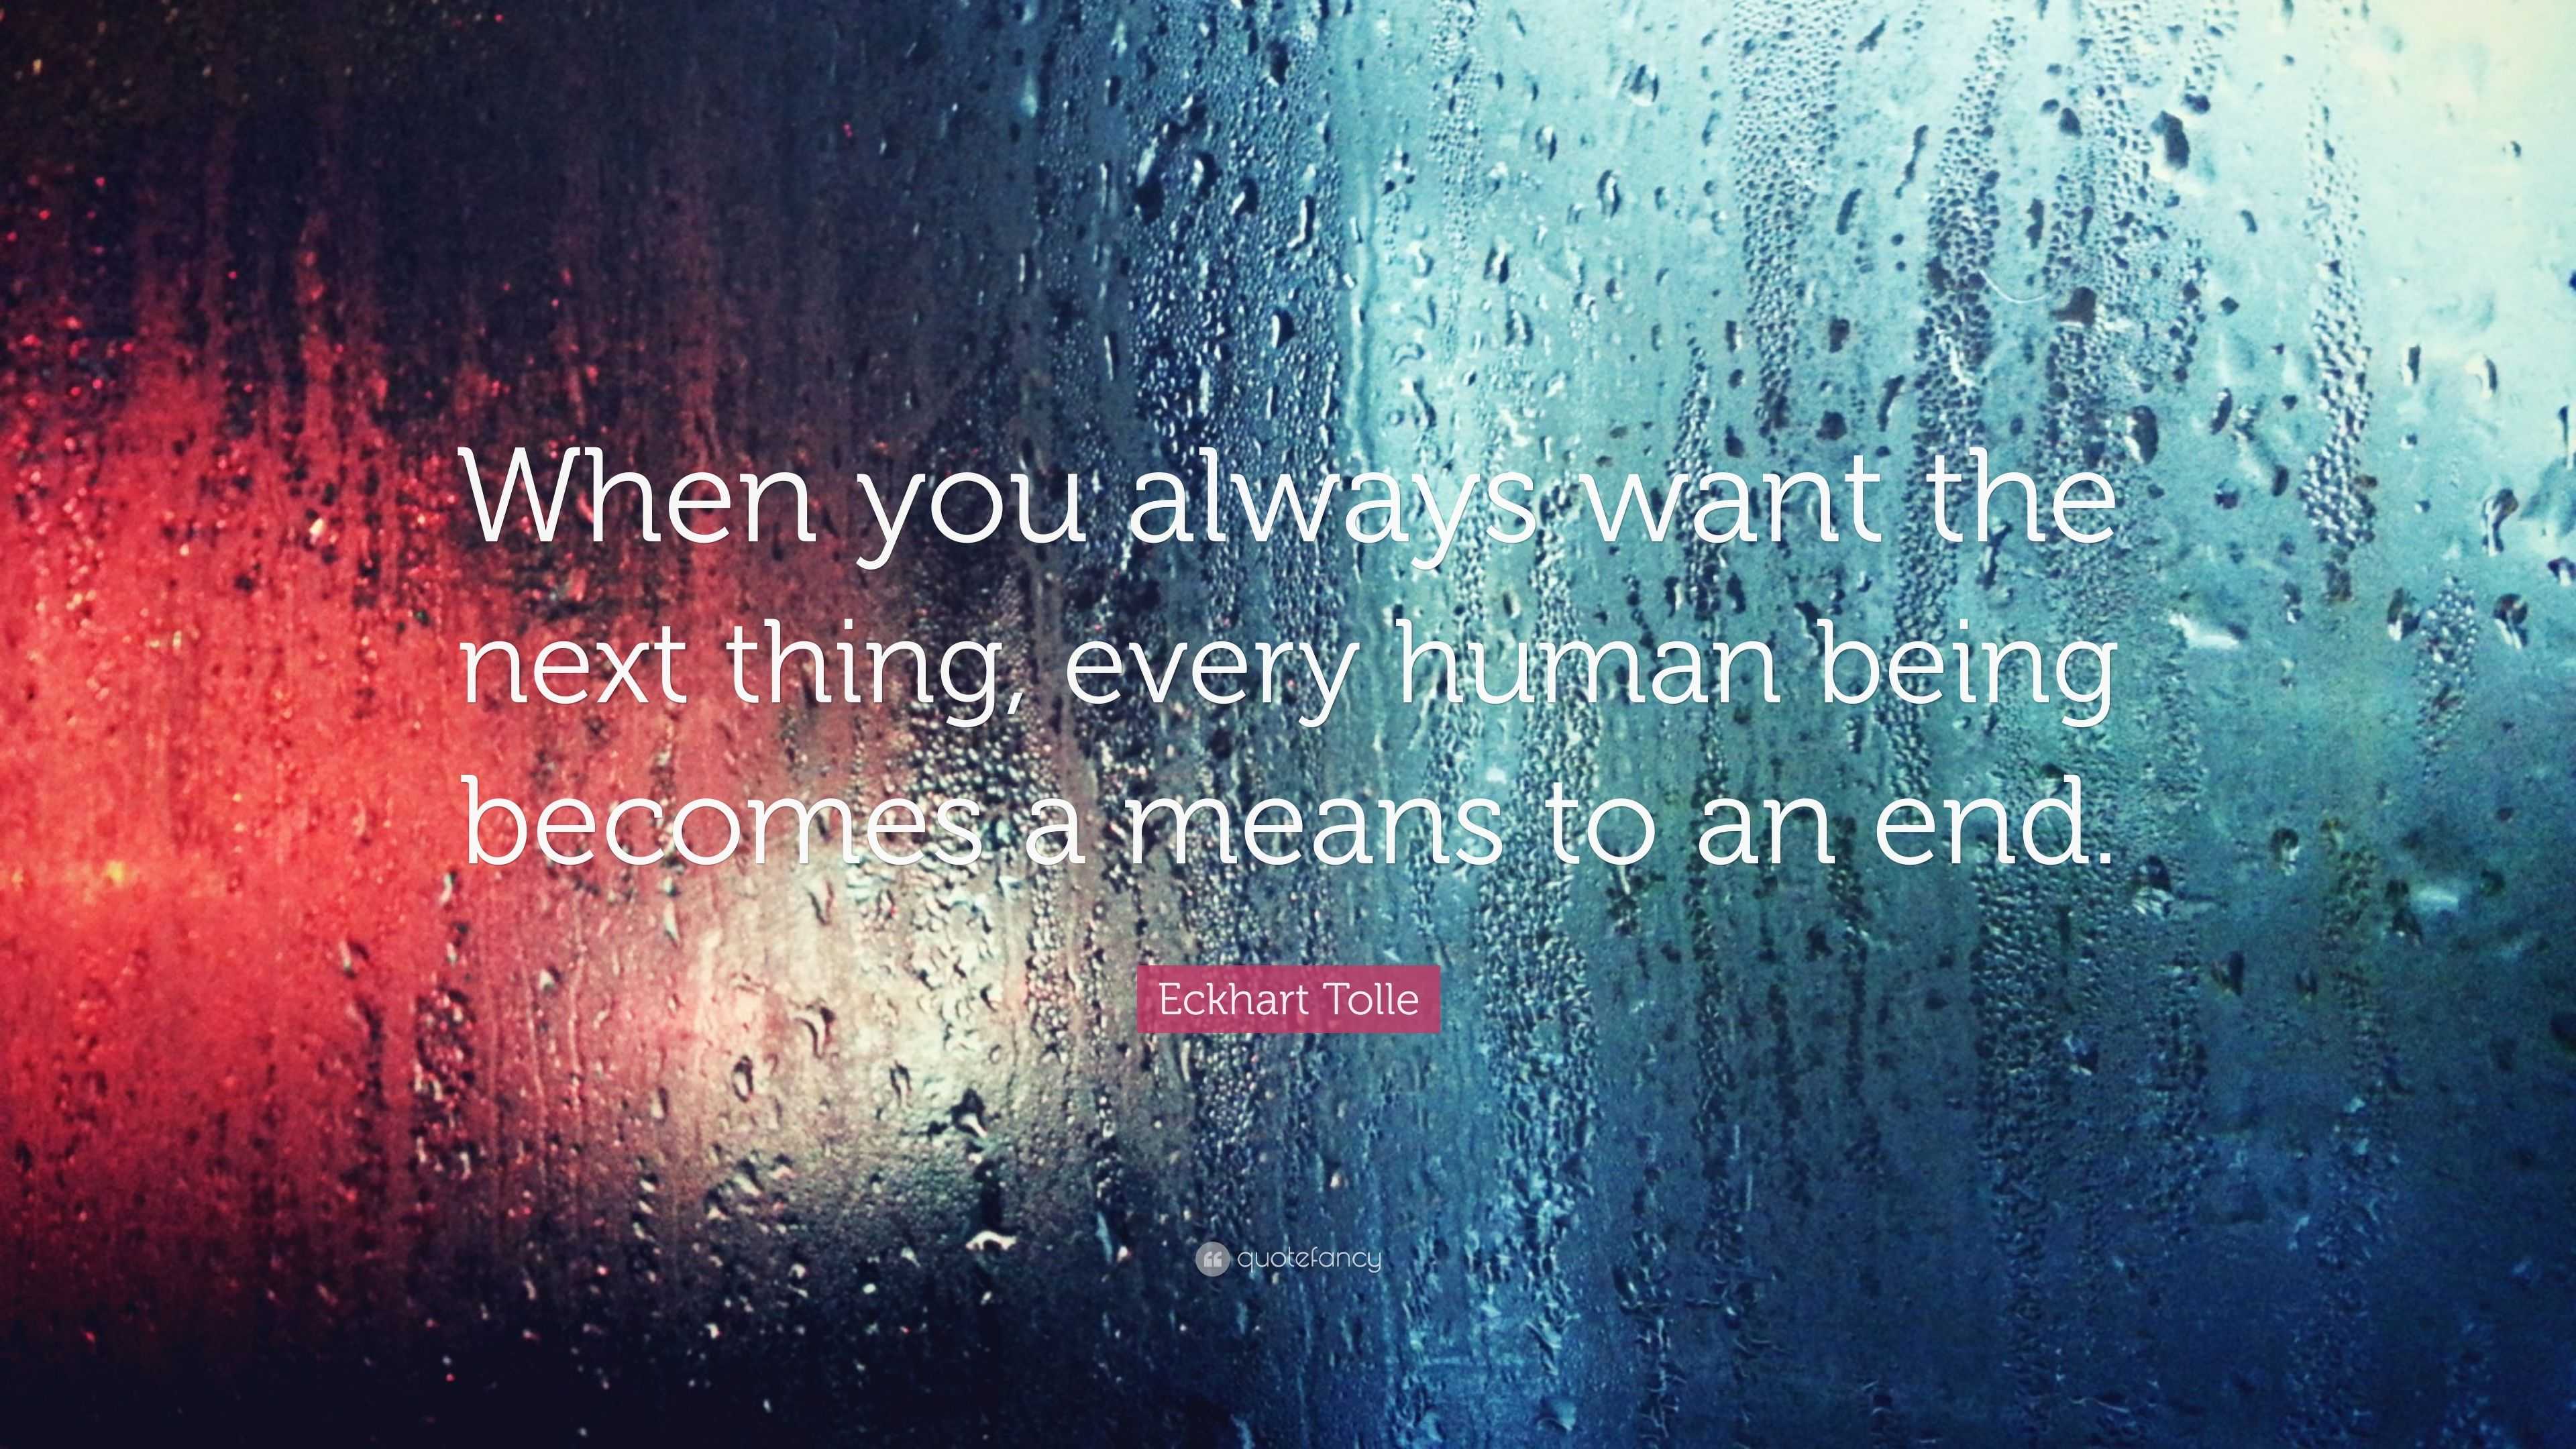 Eckhart Tolle Quote: “When you always want the next thing, every human ...